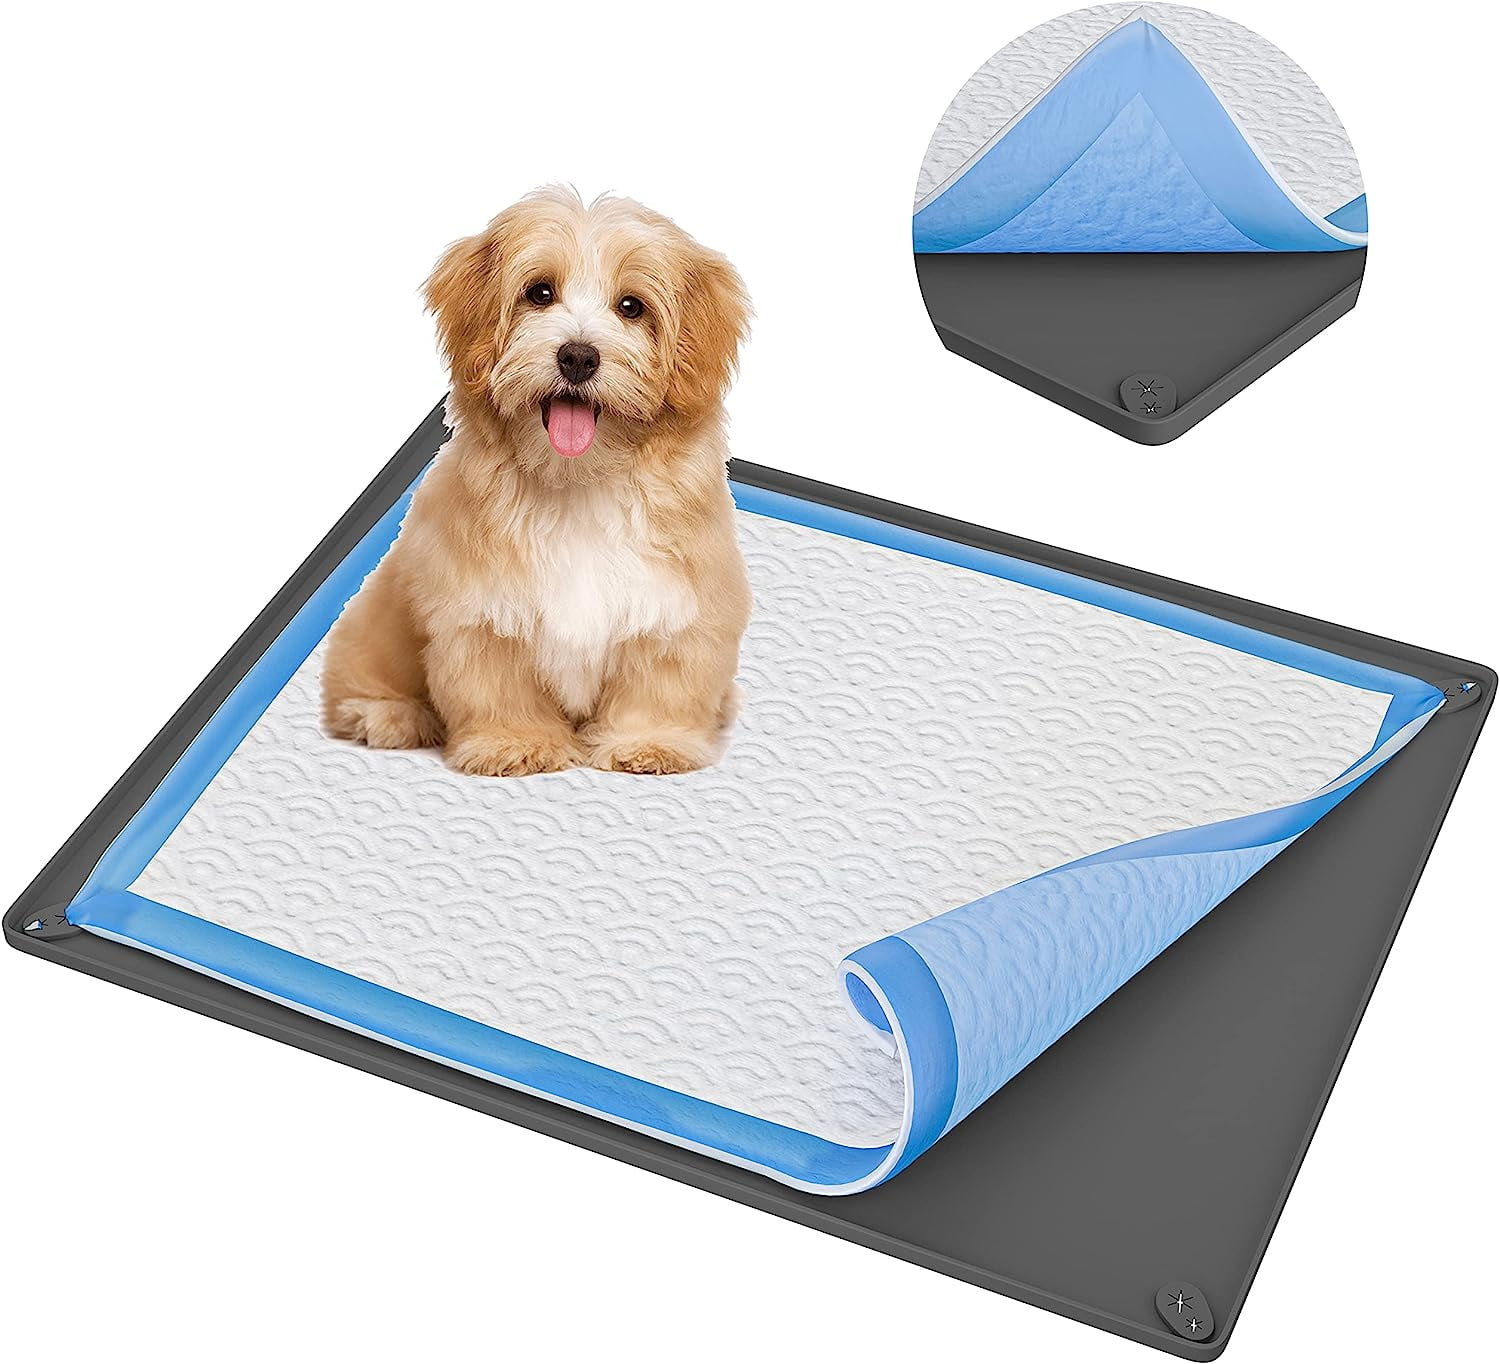 Skywin Dog Pad Holder Tray 30x36 in – ( 1 Pack ) No Spill Pee Pad Holder  for Dogs - Works with Most Training Pads - Easy to Clean and Store 